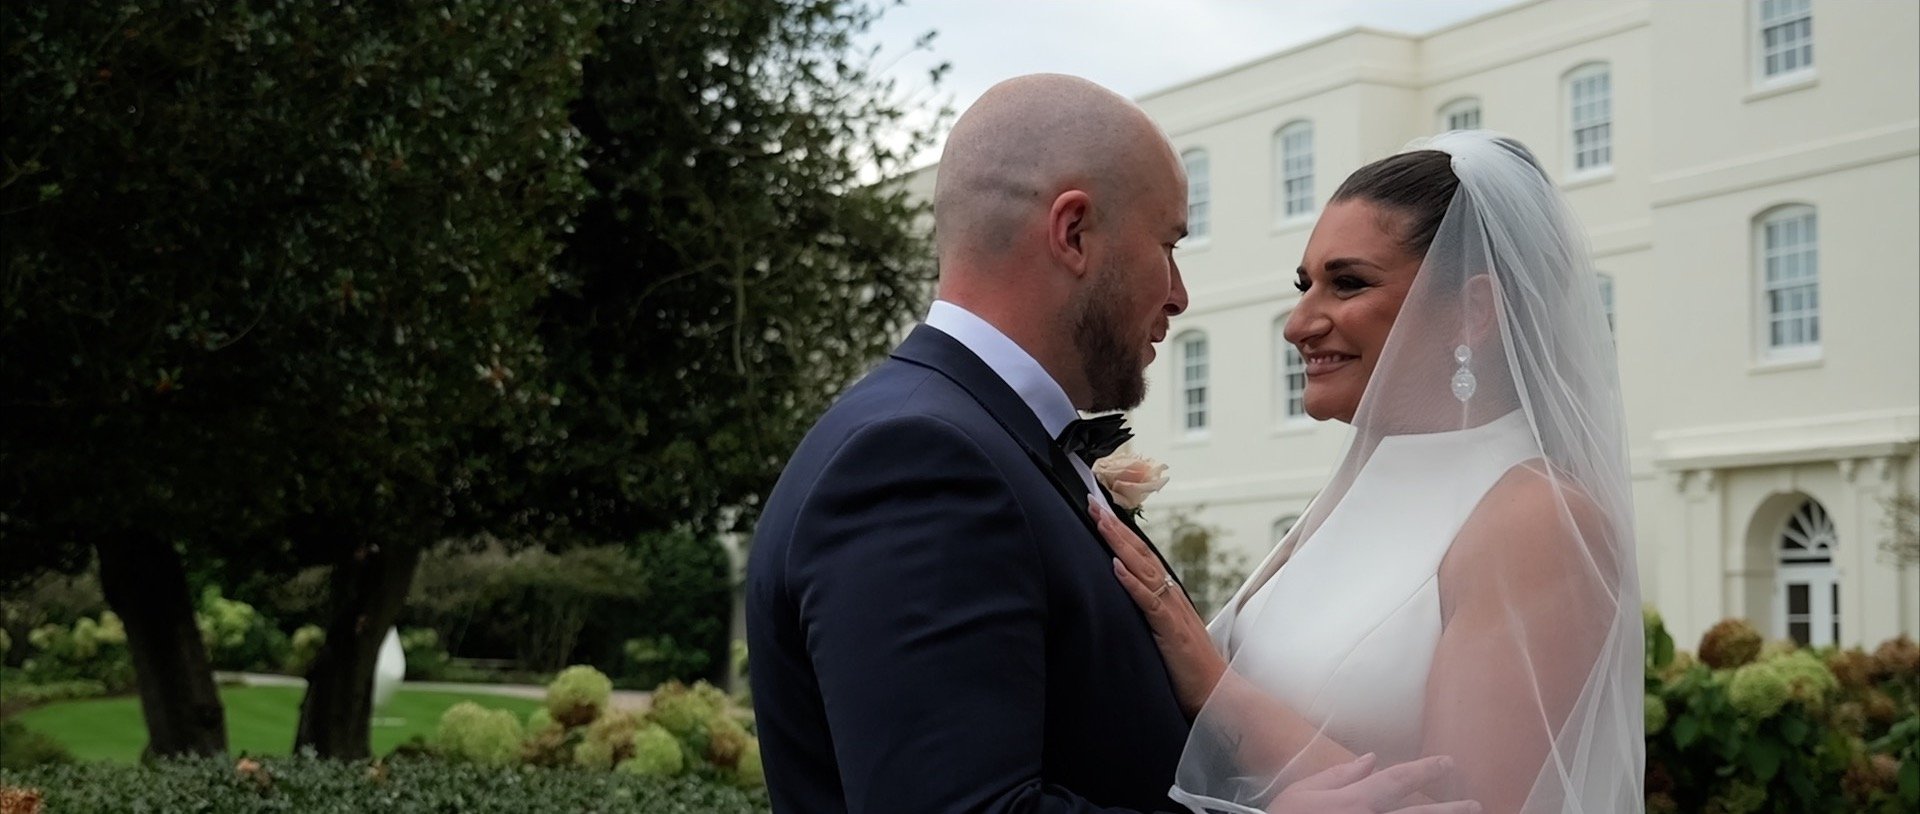 Sopwell House wedding videography - 3 Cheers Media - Nat and Tom.jpg